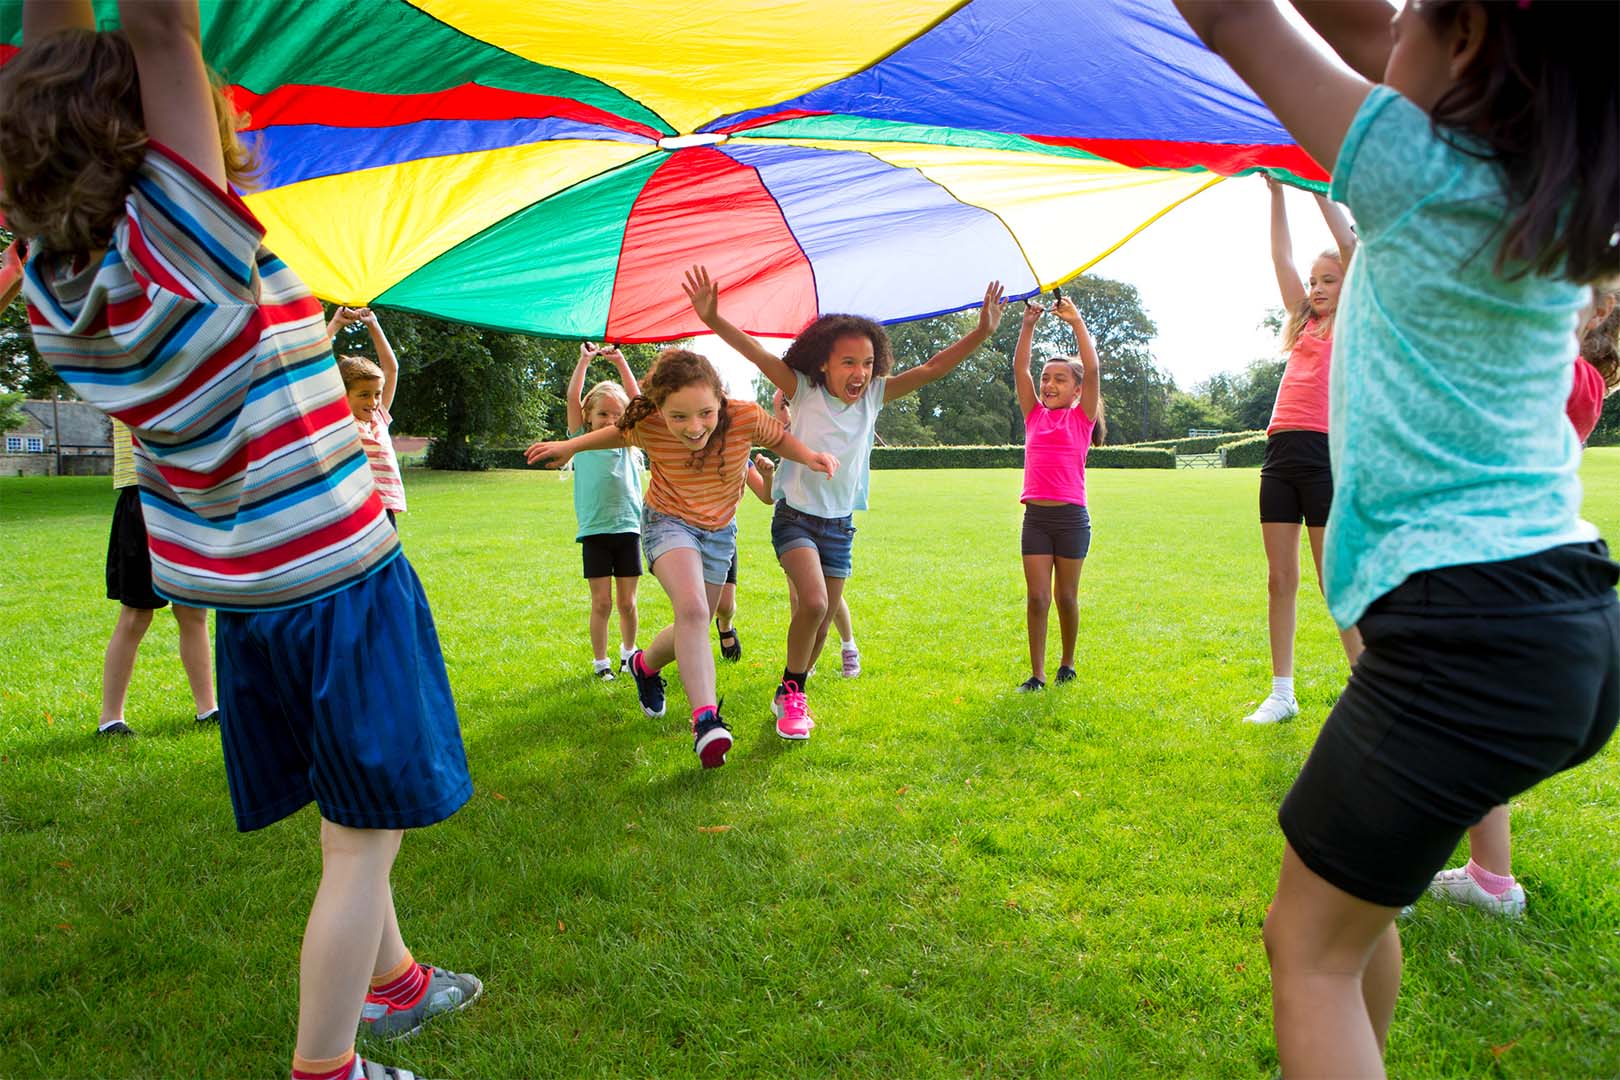 Children playing a game with a colourful parachute.